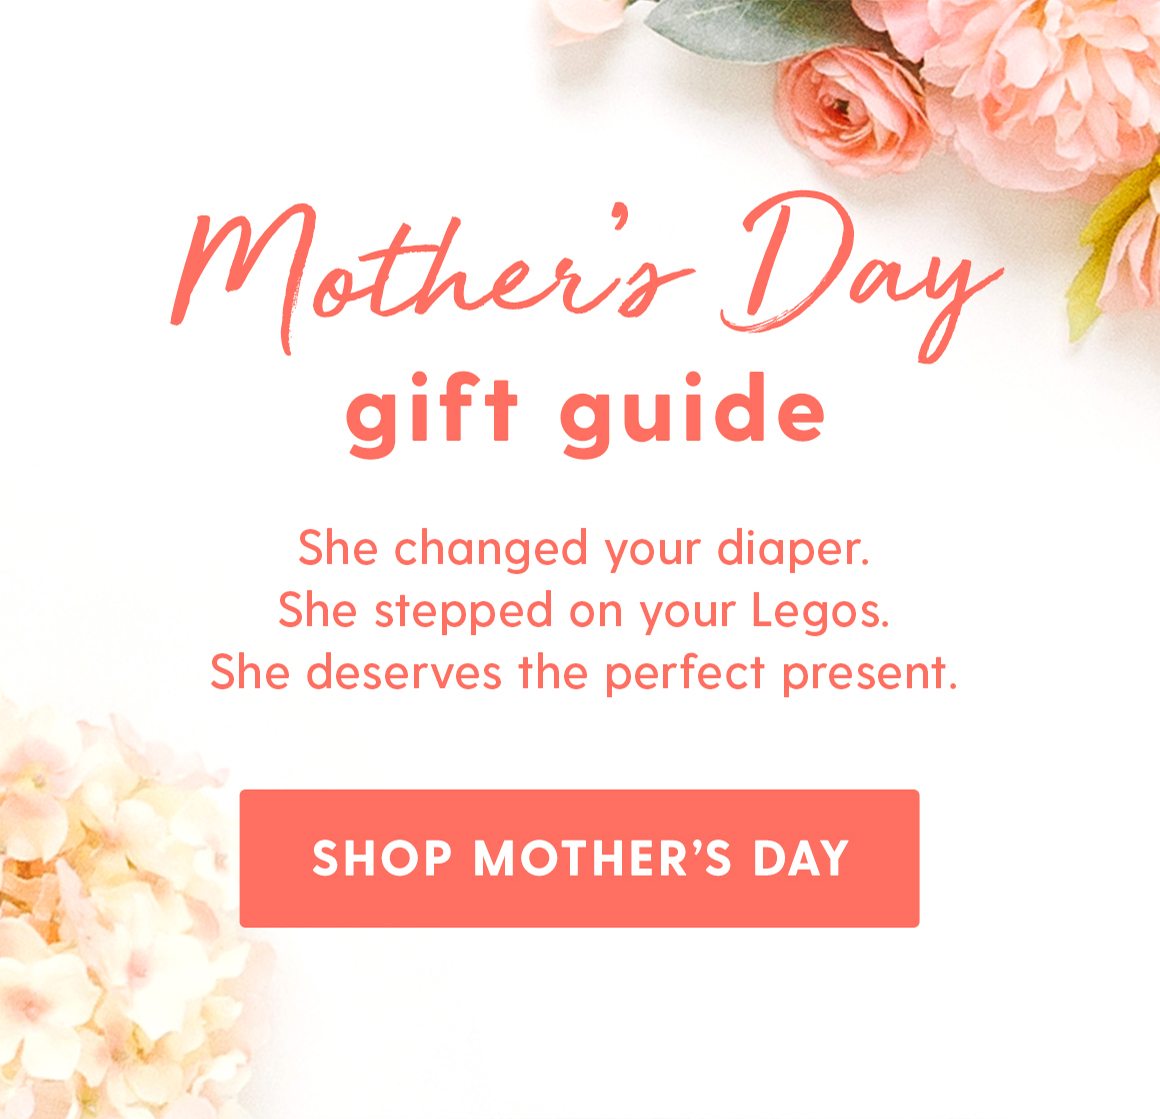 Mother's Day gift guide. She deserves the perfect present. Shop Mother's Day.